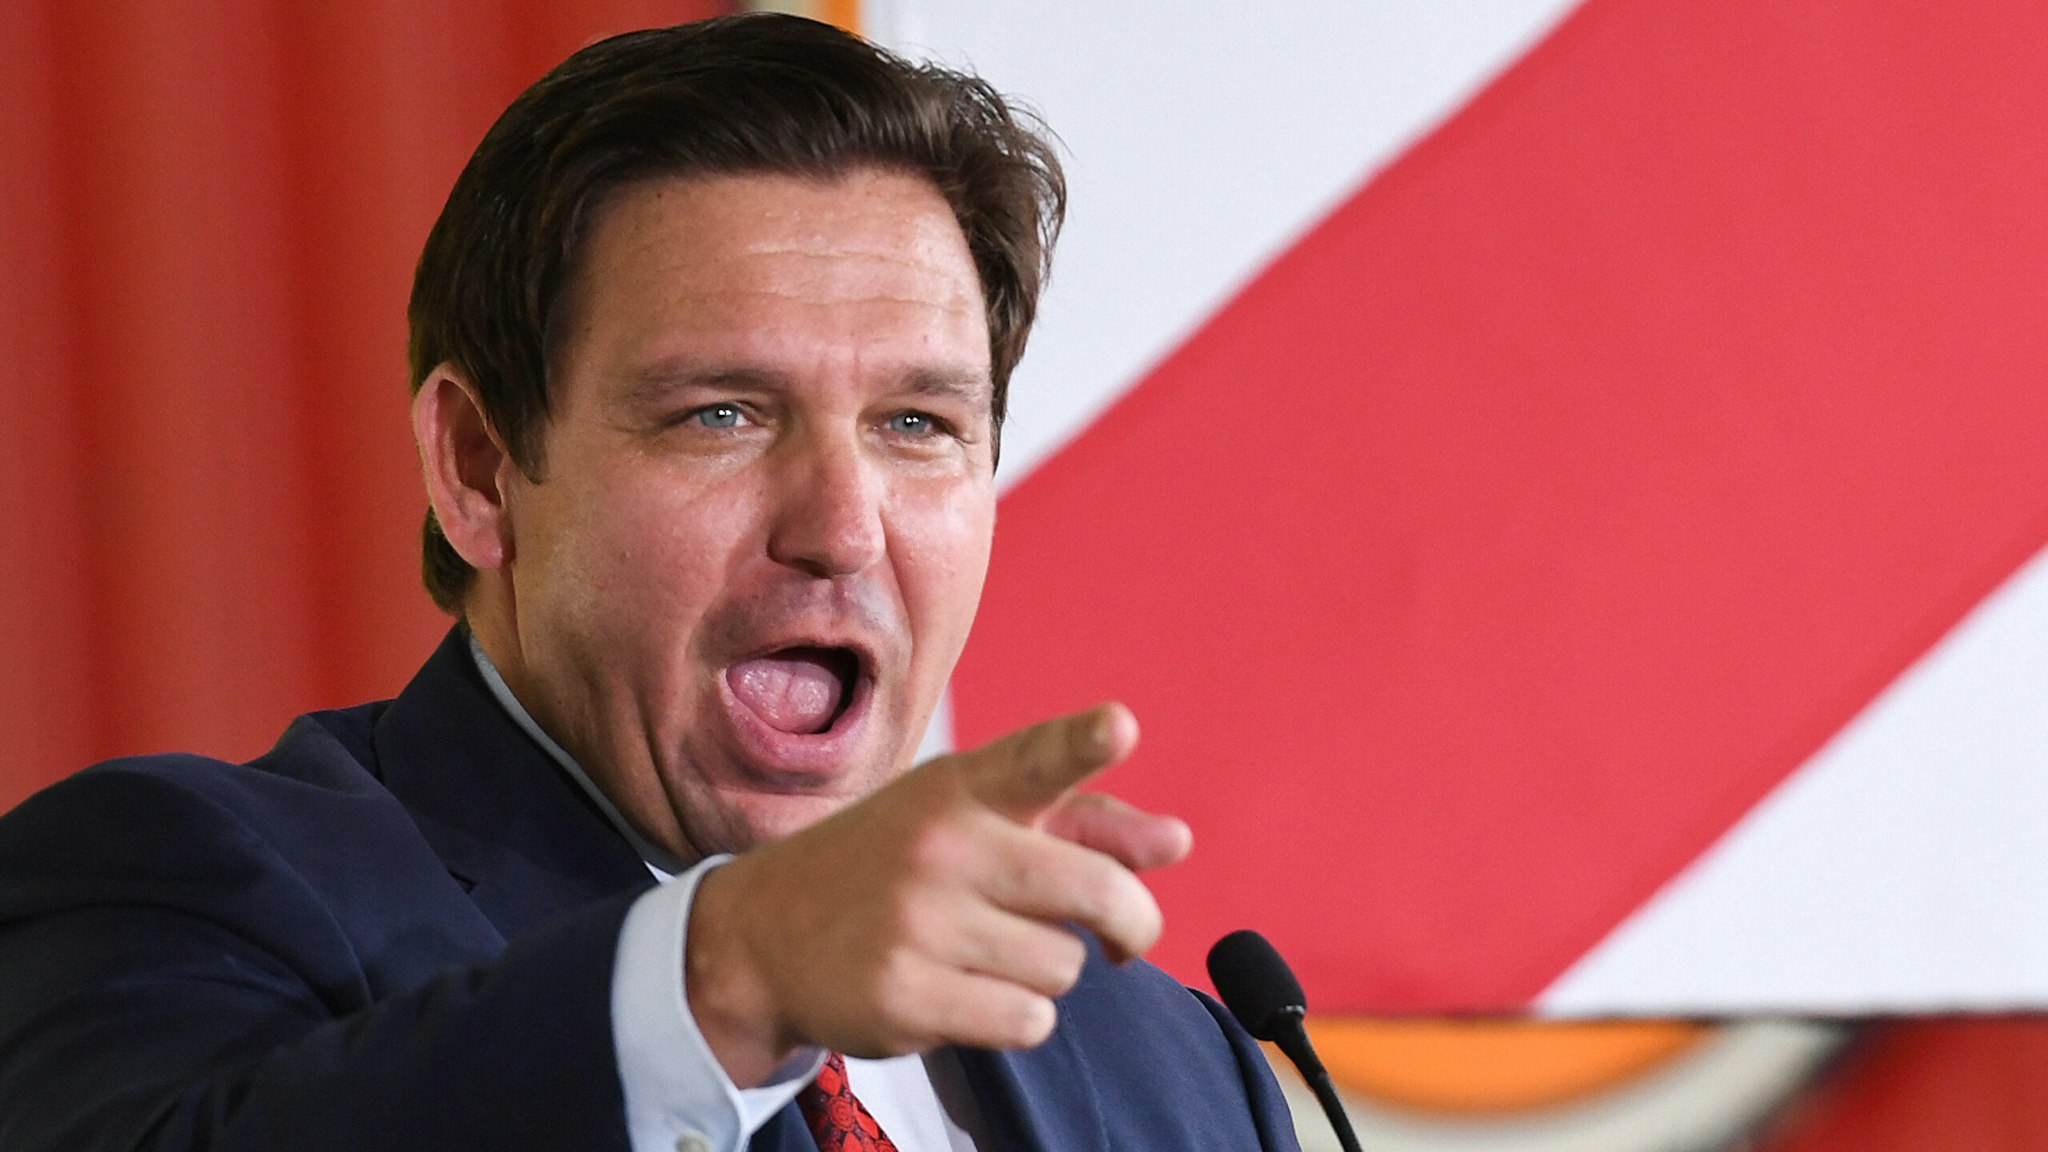 GENEVA, UNITED STATES - 2022/08/24: Florida Gov. Ron DeSantis speaks to supporters at a campaign stop on the Keep Florida Free Tour at the Horsepower Ranch in Geneva. DeSantis faces former Florida Gov. Charlie Crist for the general election for Florida Governor in November.